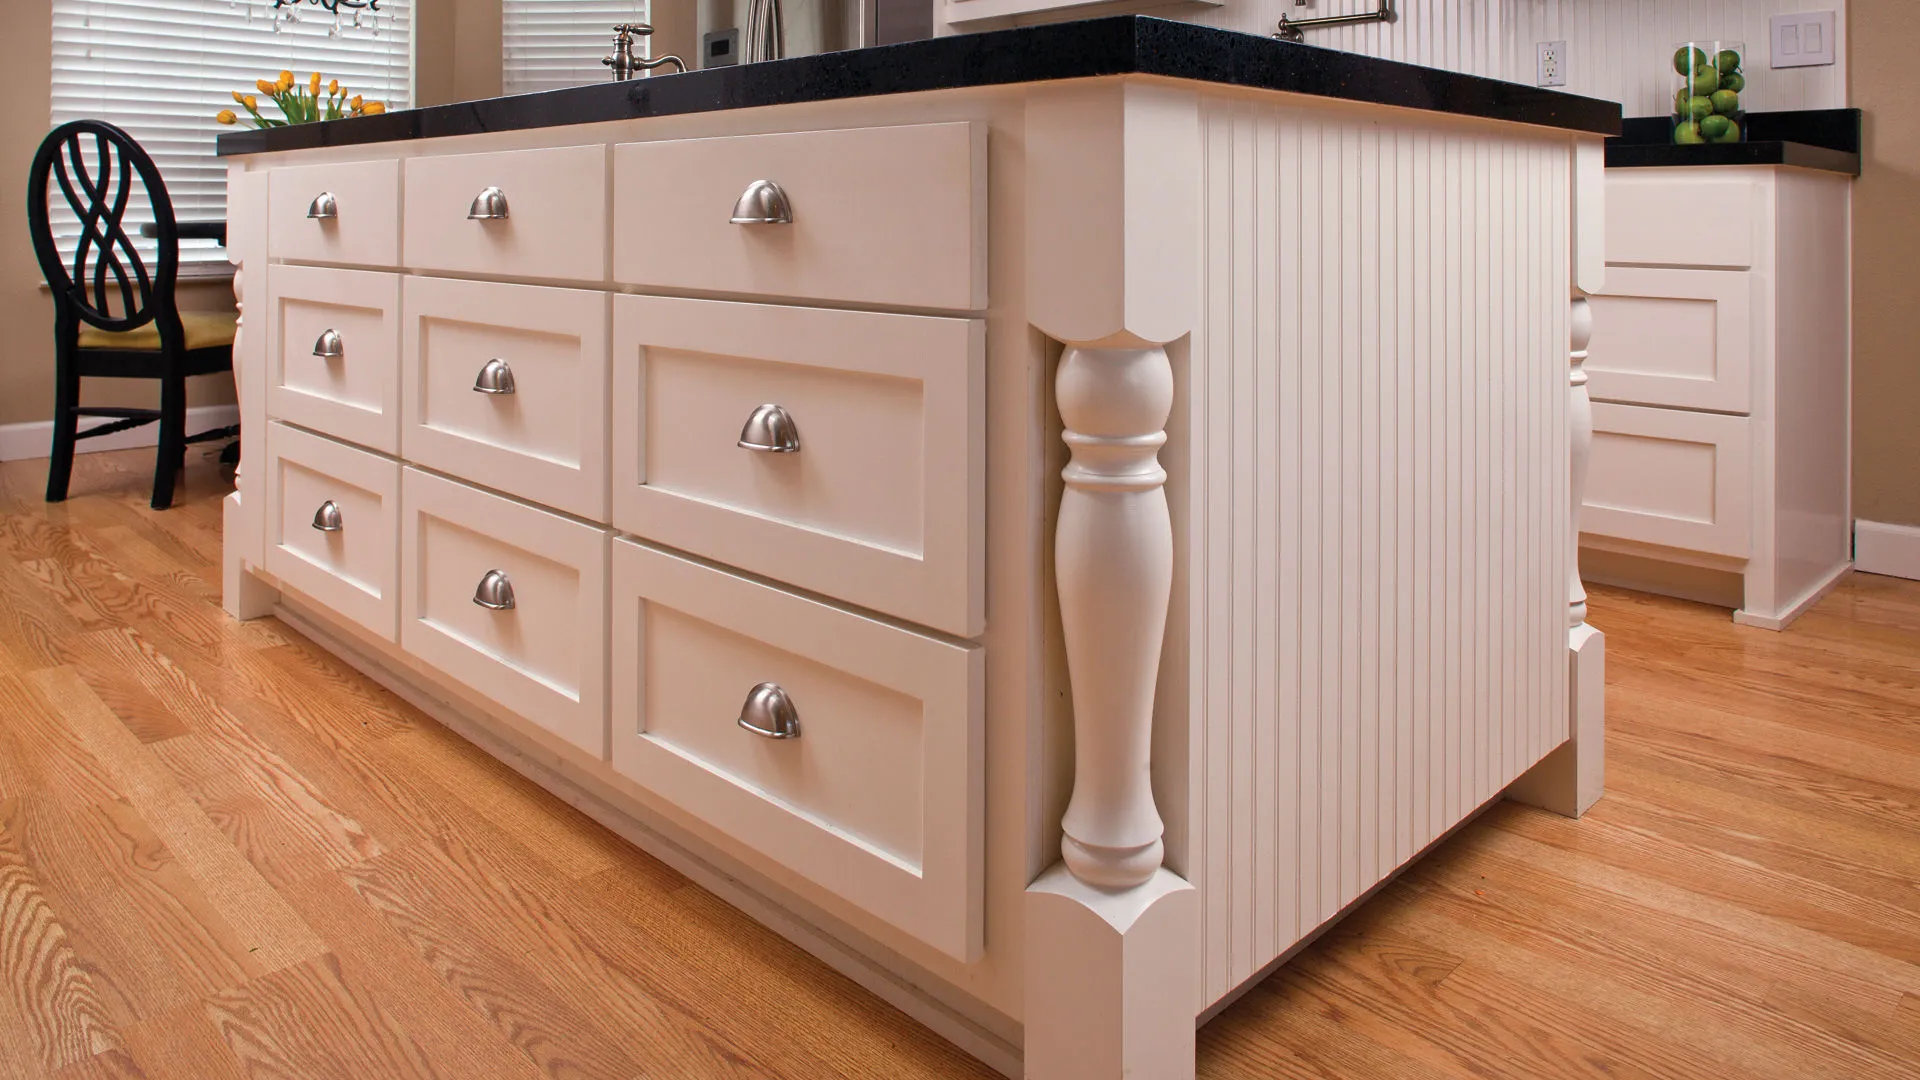 kitchen cabinet refacing cost